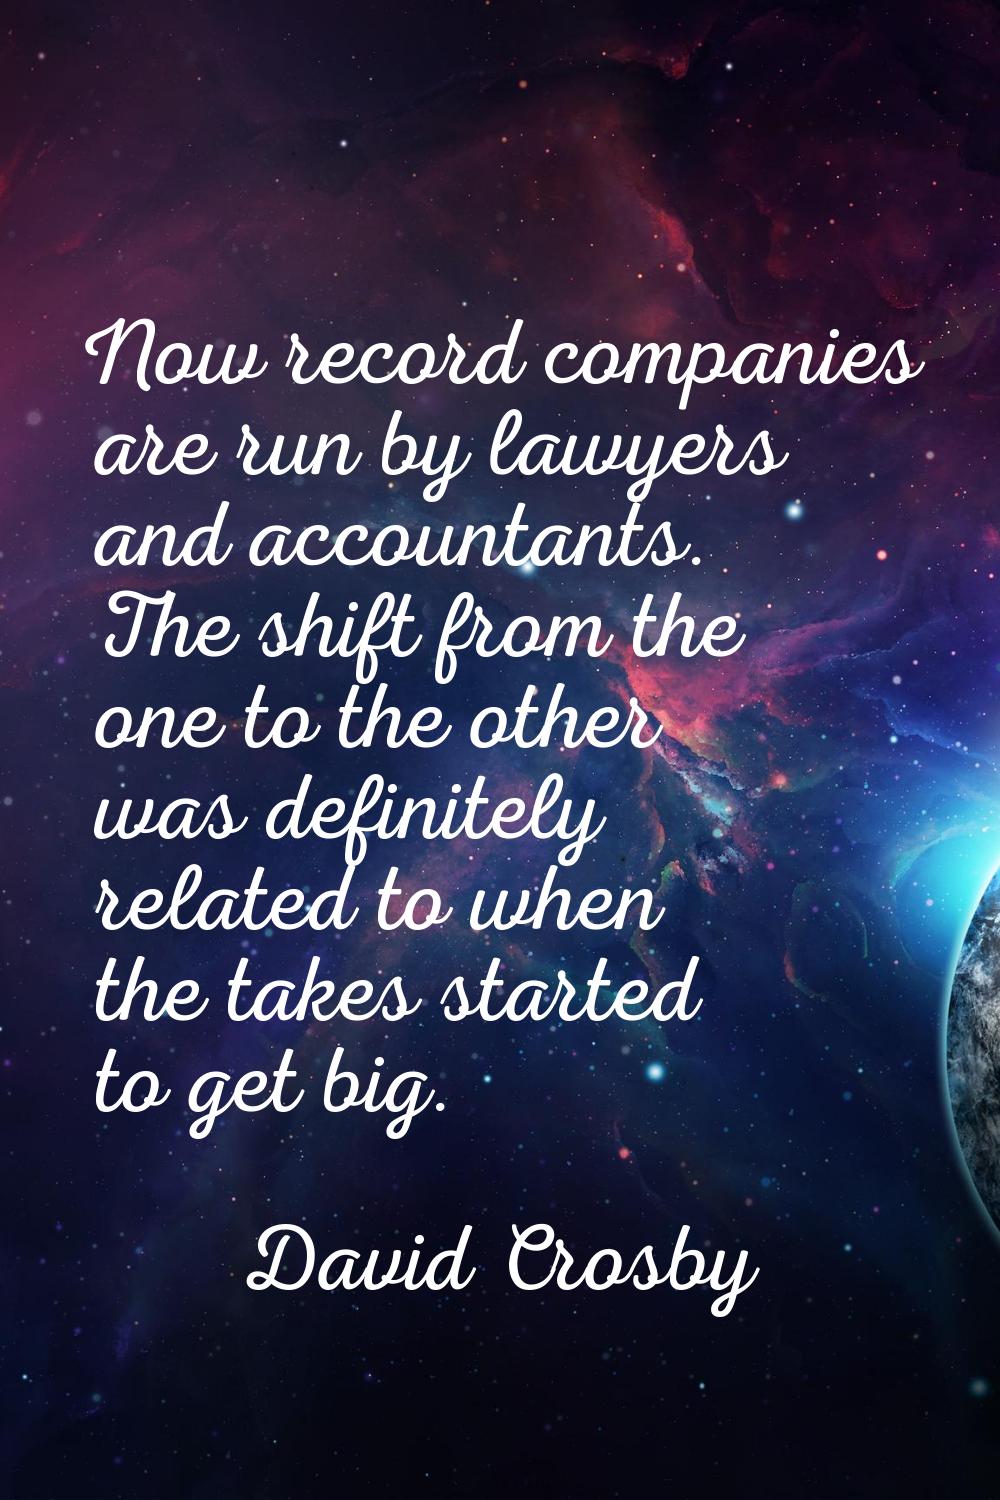 Now record companies are run by lawyers and accountants. The shift from the one to the other was de